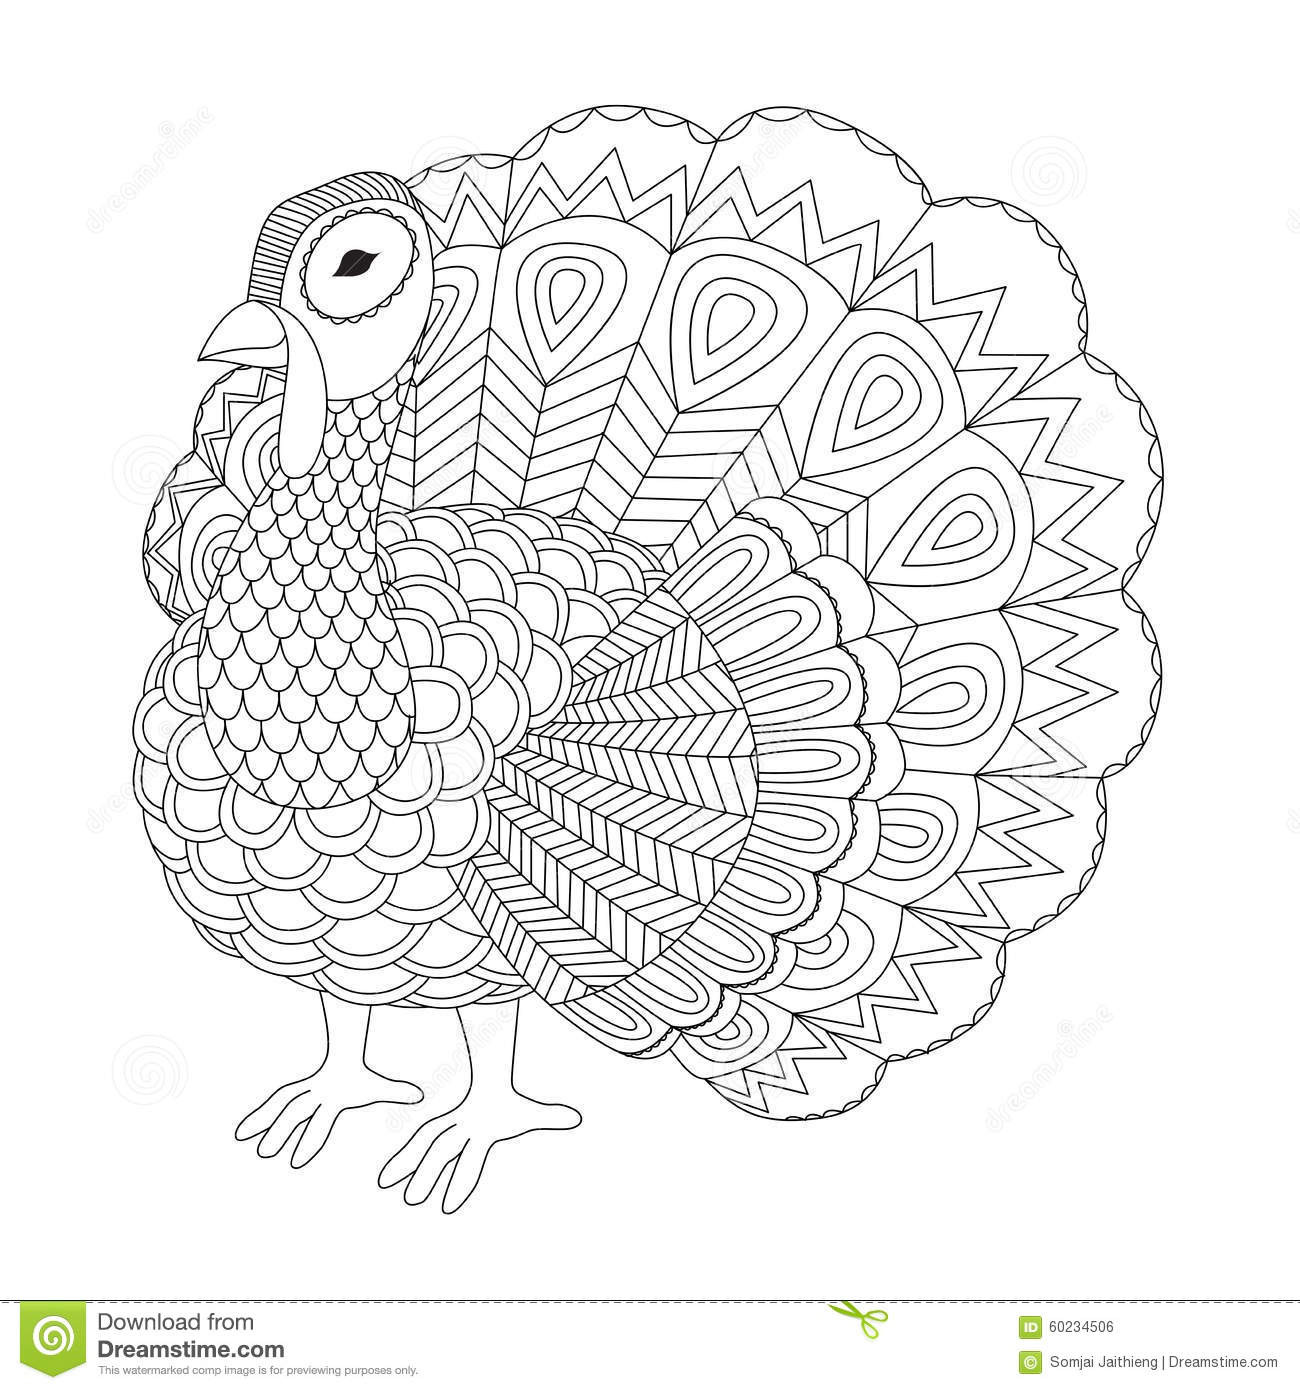 Turkey Coloring Pages For Adults
 Detailed Zentangle Turkey For Coloring Page For Adult